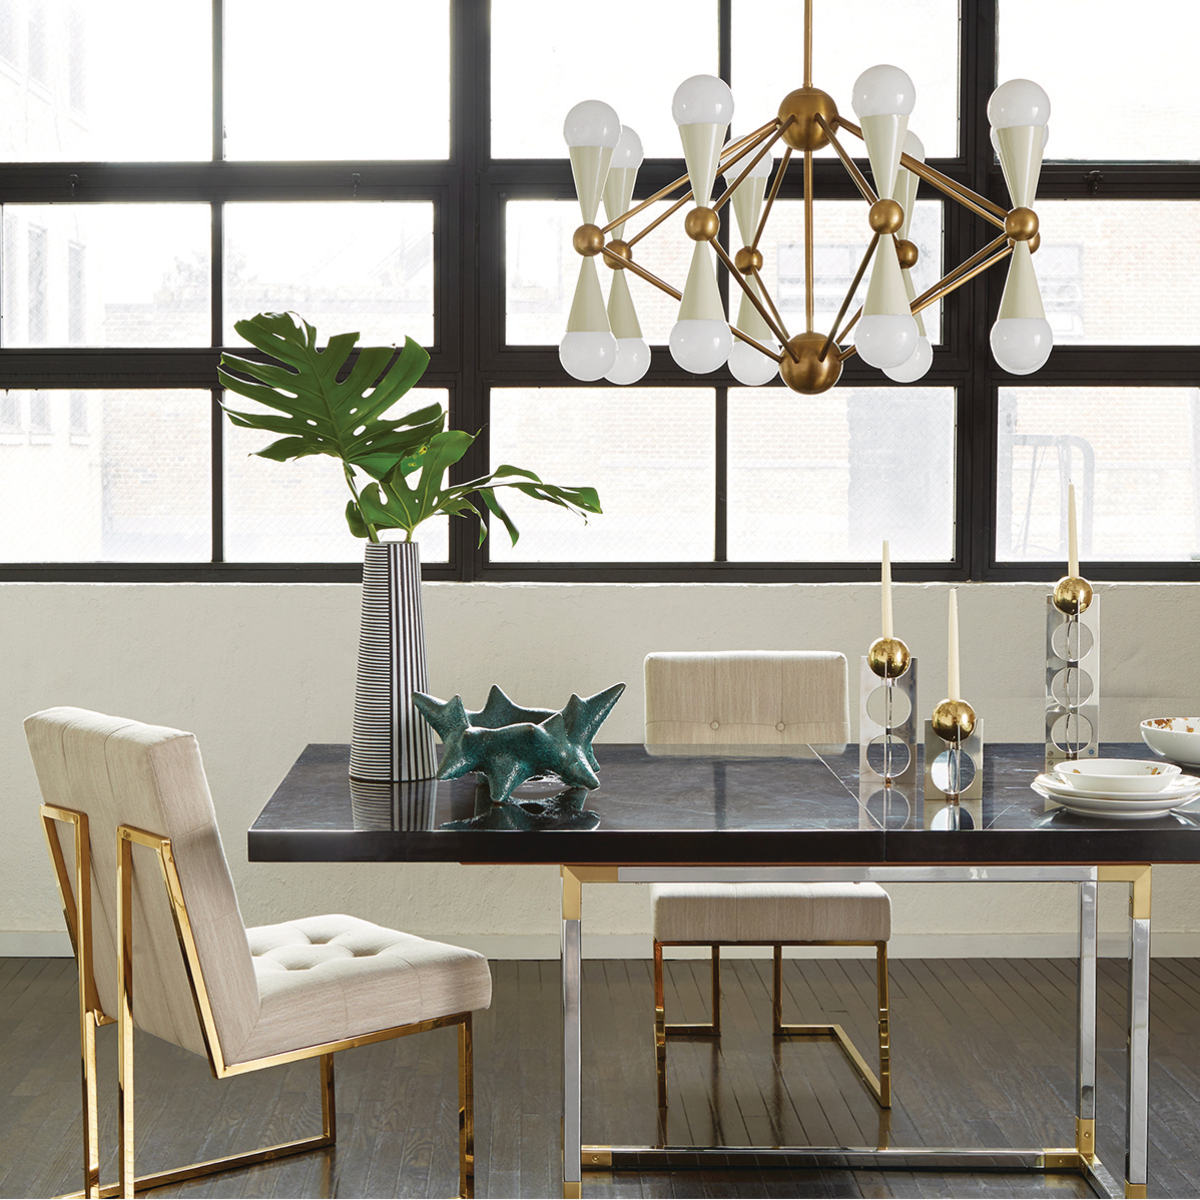 Hourglass-shaped lighting fixture over black dining table with plant and sculptural accents